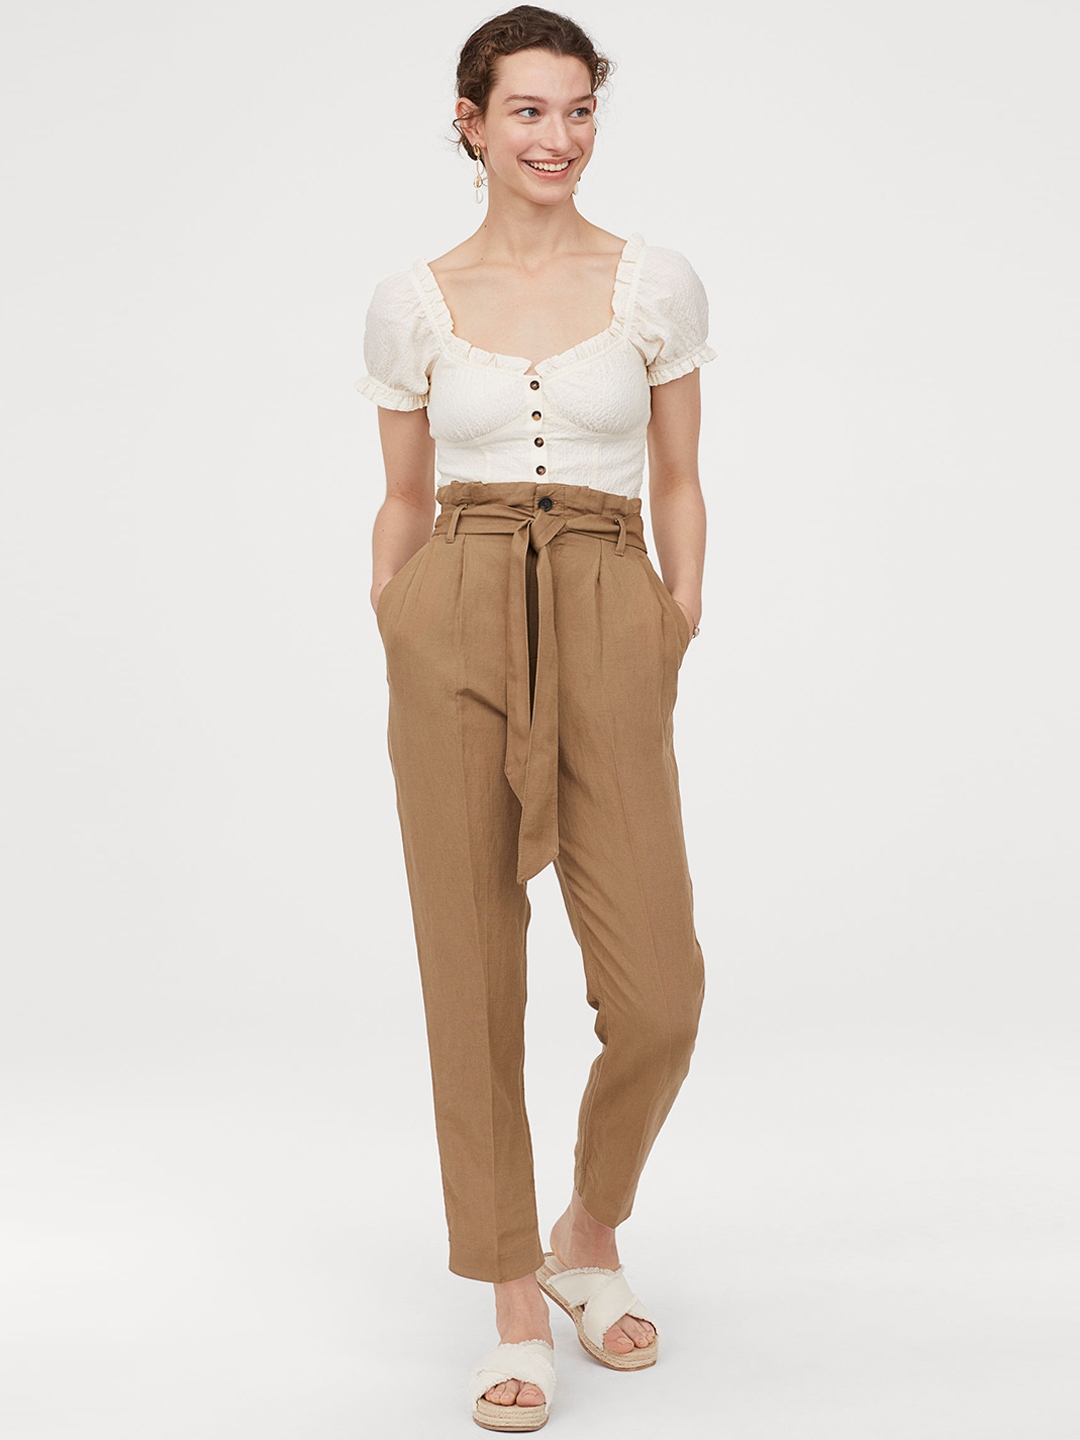 Styli Trousers and Pants  Buy Styli Beige Paperbag Waist Wide Leg Belted  Tailored Trouser Set of 2 Online  Nykaa Fashion